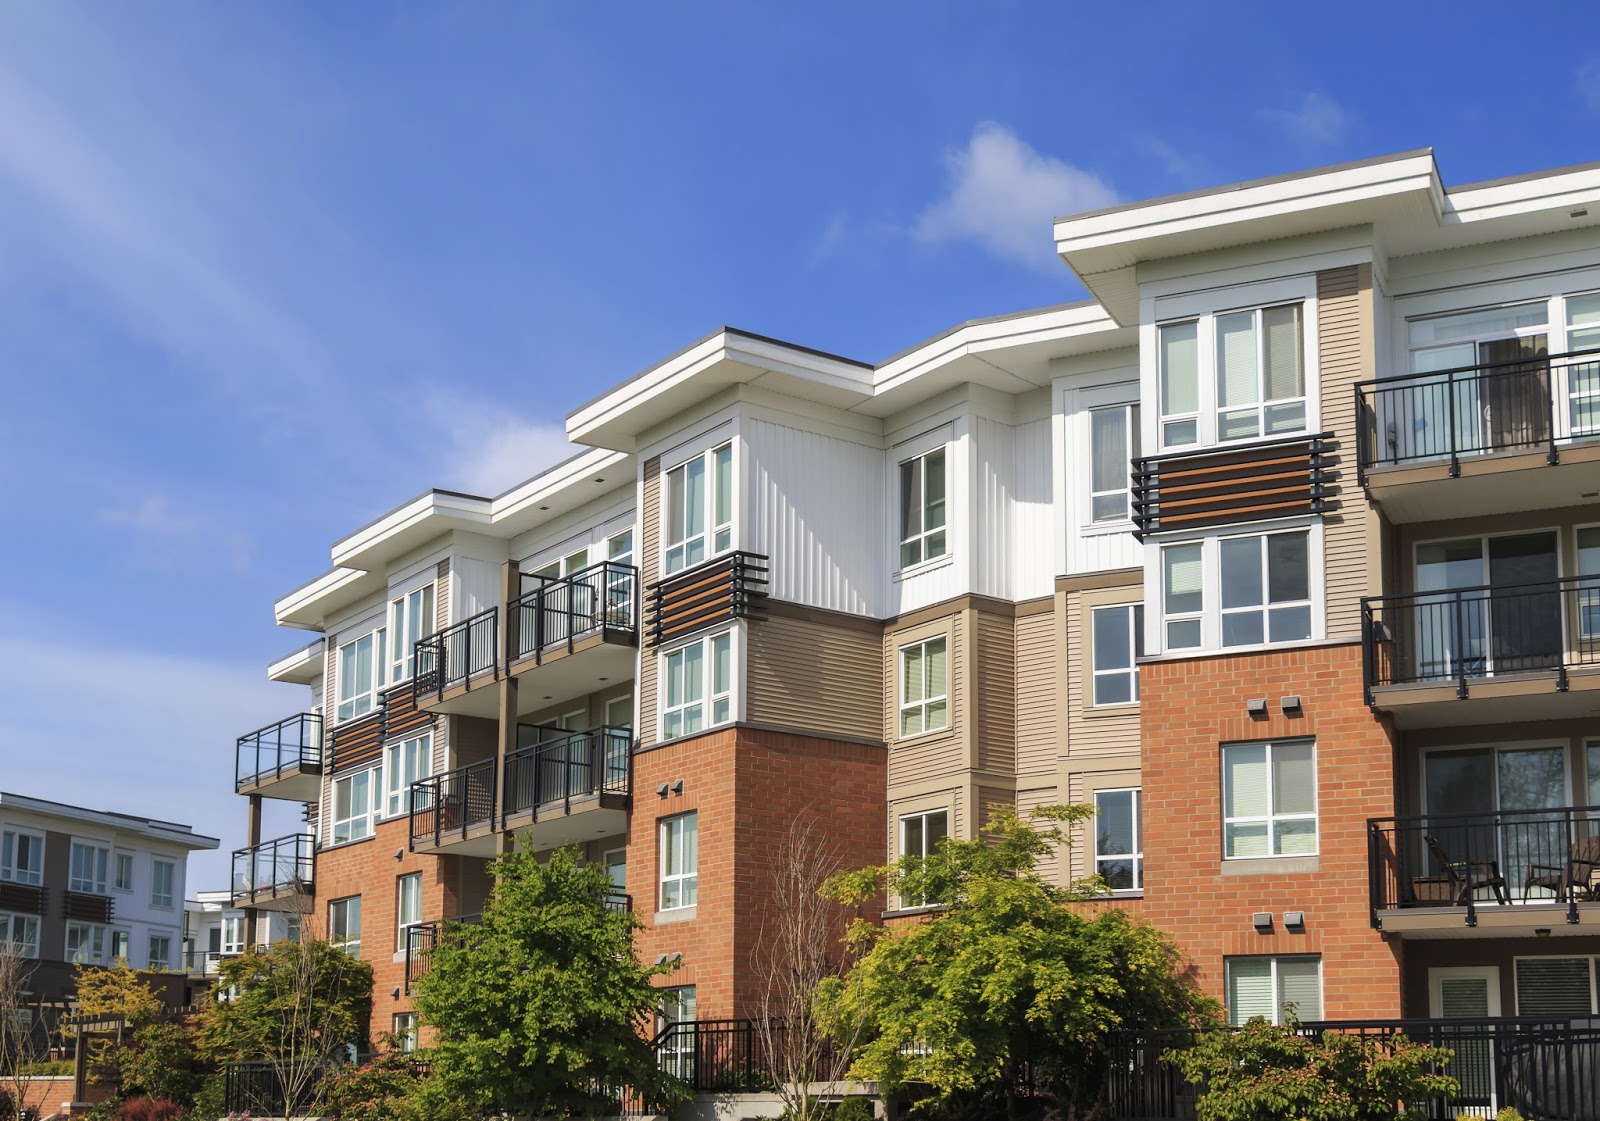 Aesthetics Prove Costly For New Jersey Condominium Owner New Jersey Condo Blog